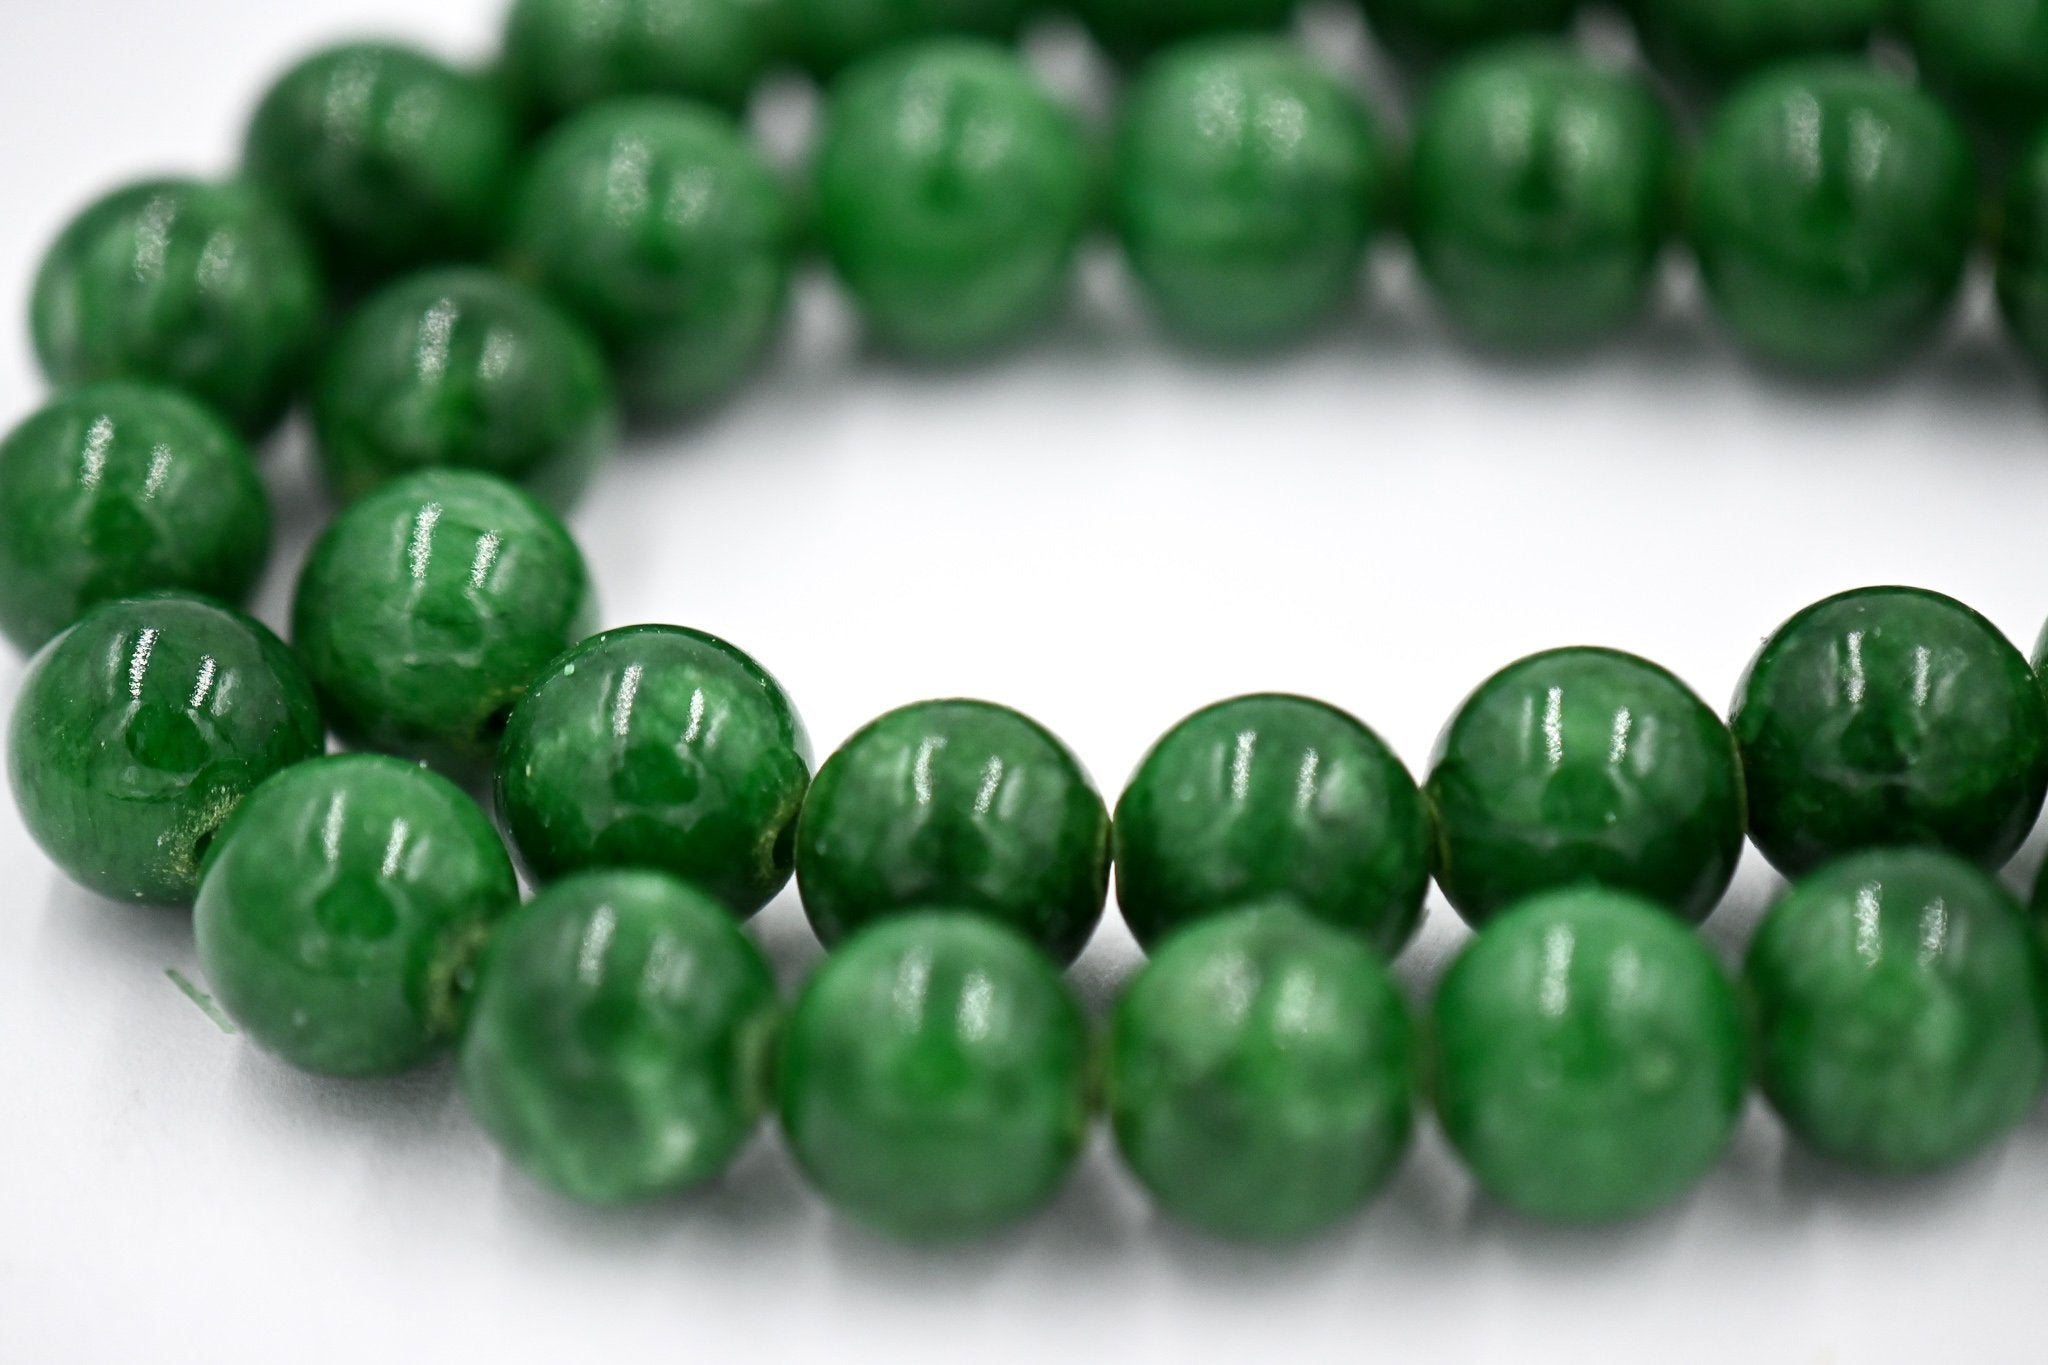 Two Strands, Green Jade, 4mm, 6mm, 8mm, 10mm, 12mm Jade Round Beads in Opaque Finish -Full Strand